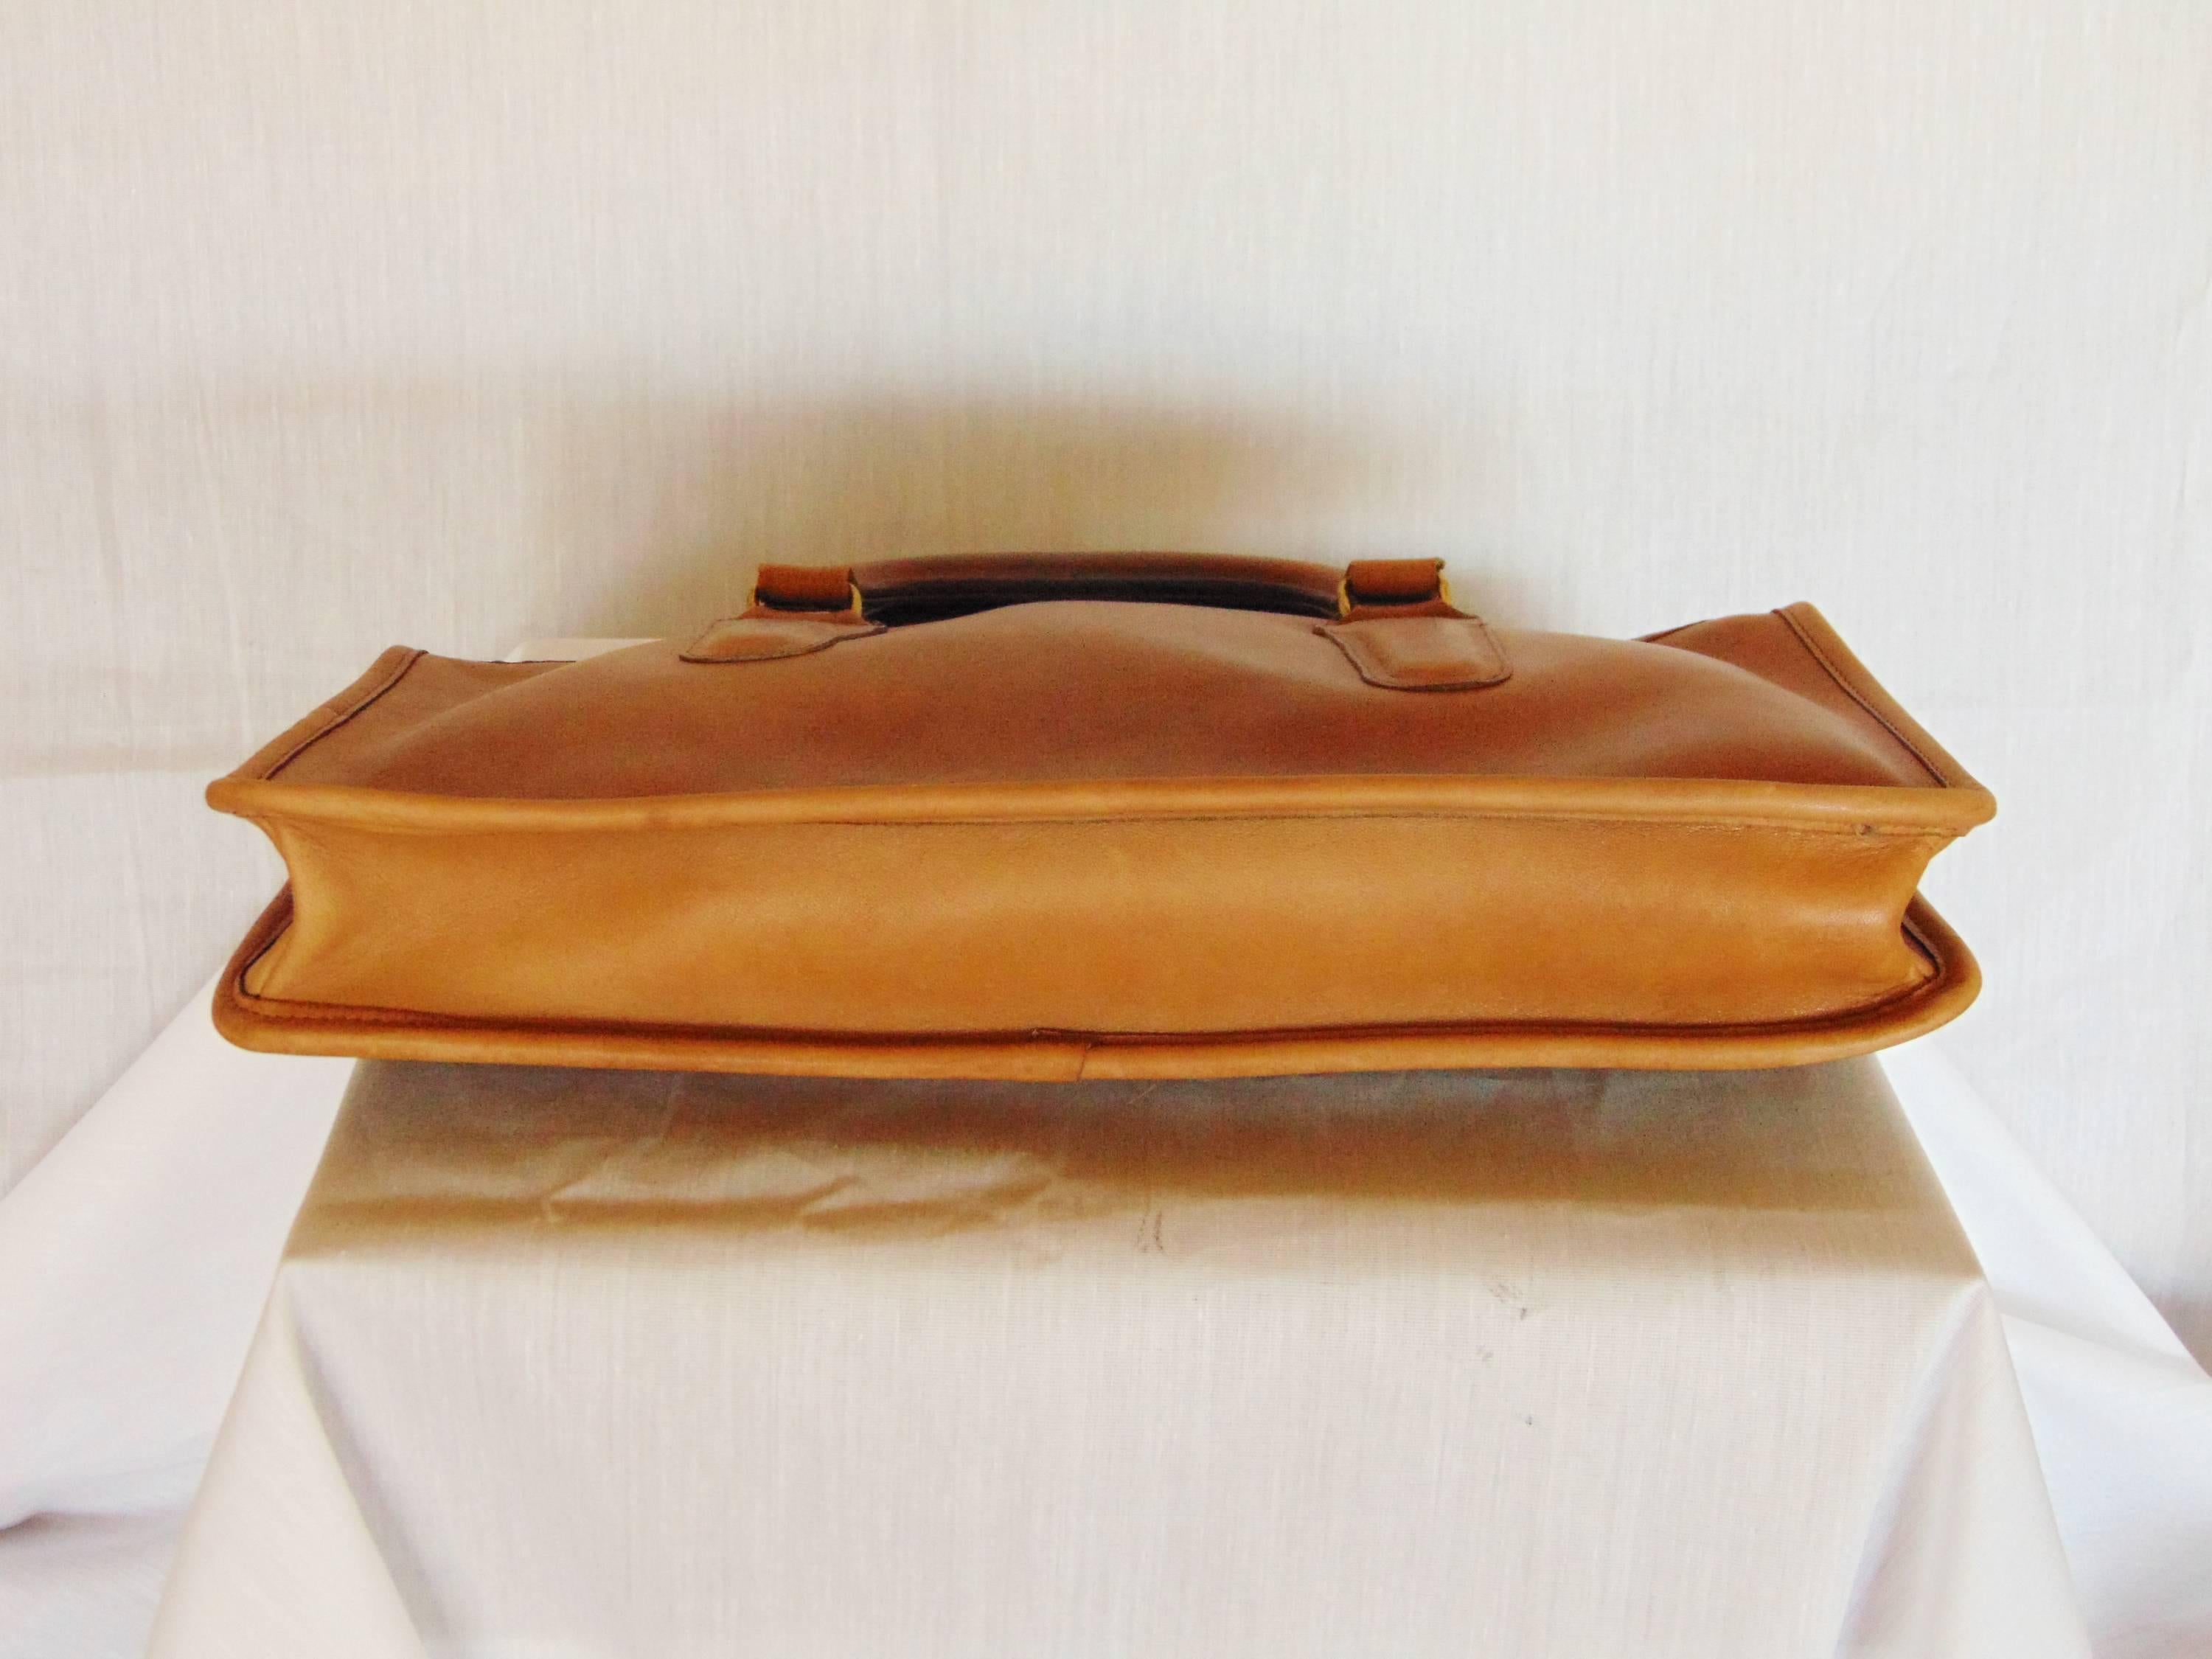 Bonnie Cashin for Coach Saddle Leather Zippered Tote Bag 1970s New York ...